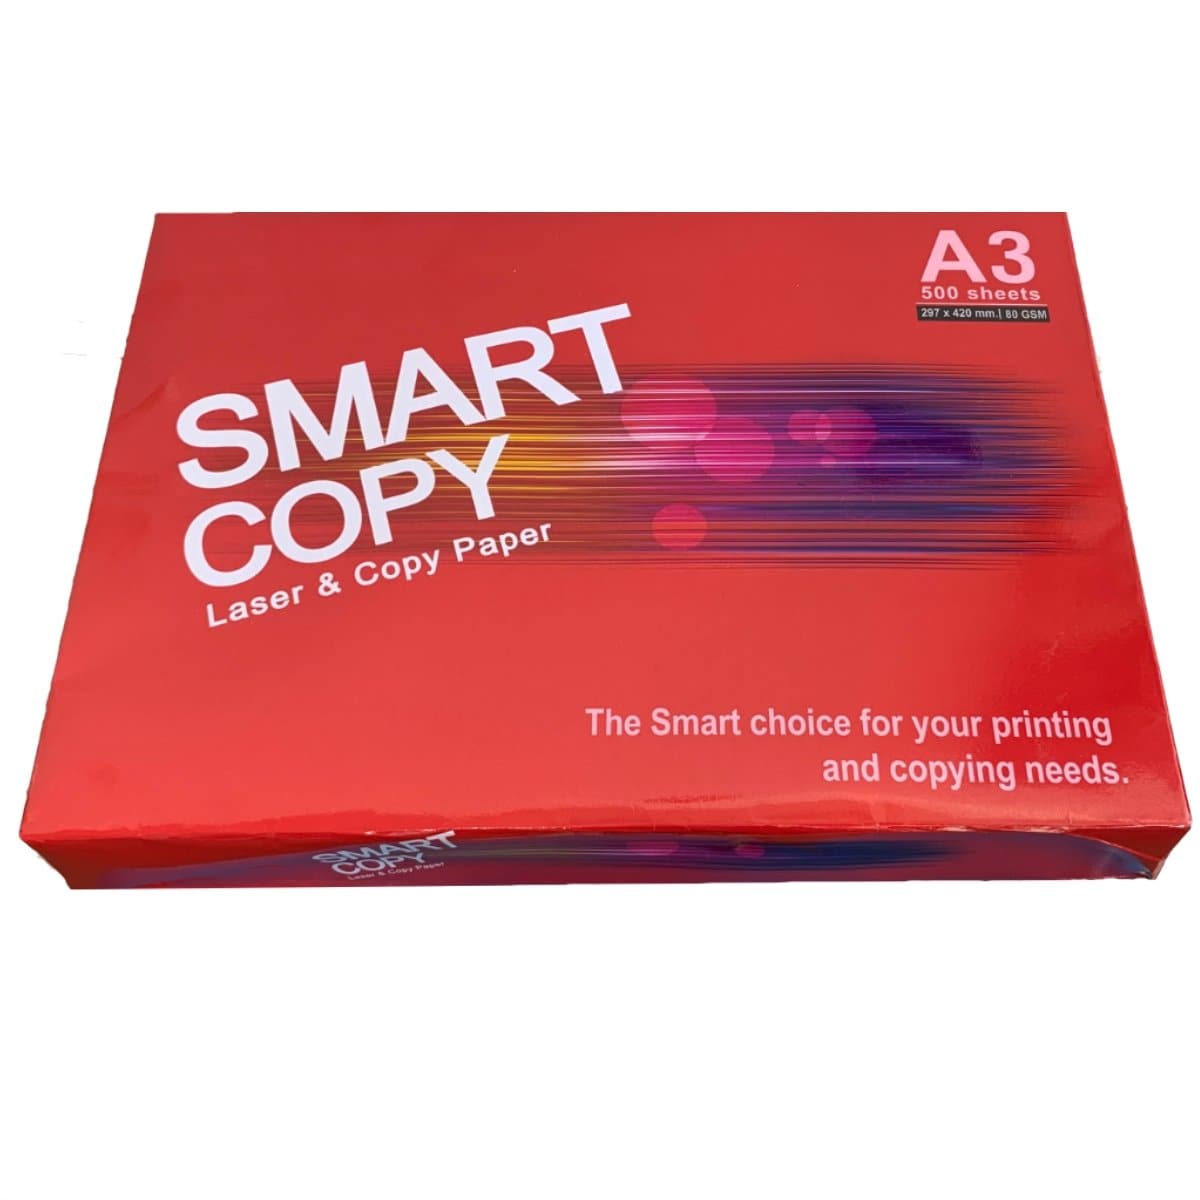 SMART COPY Paper A3, 80gsm, 500sheets/ream, White